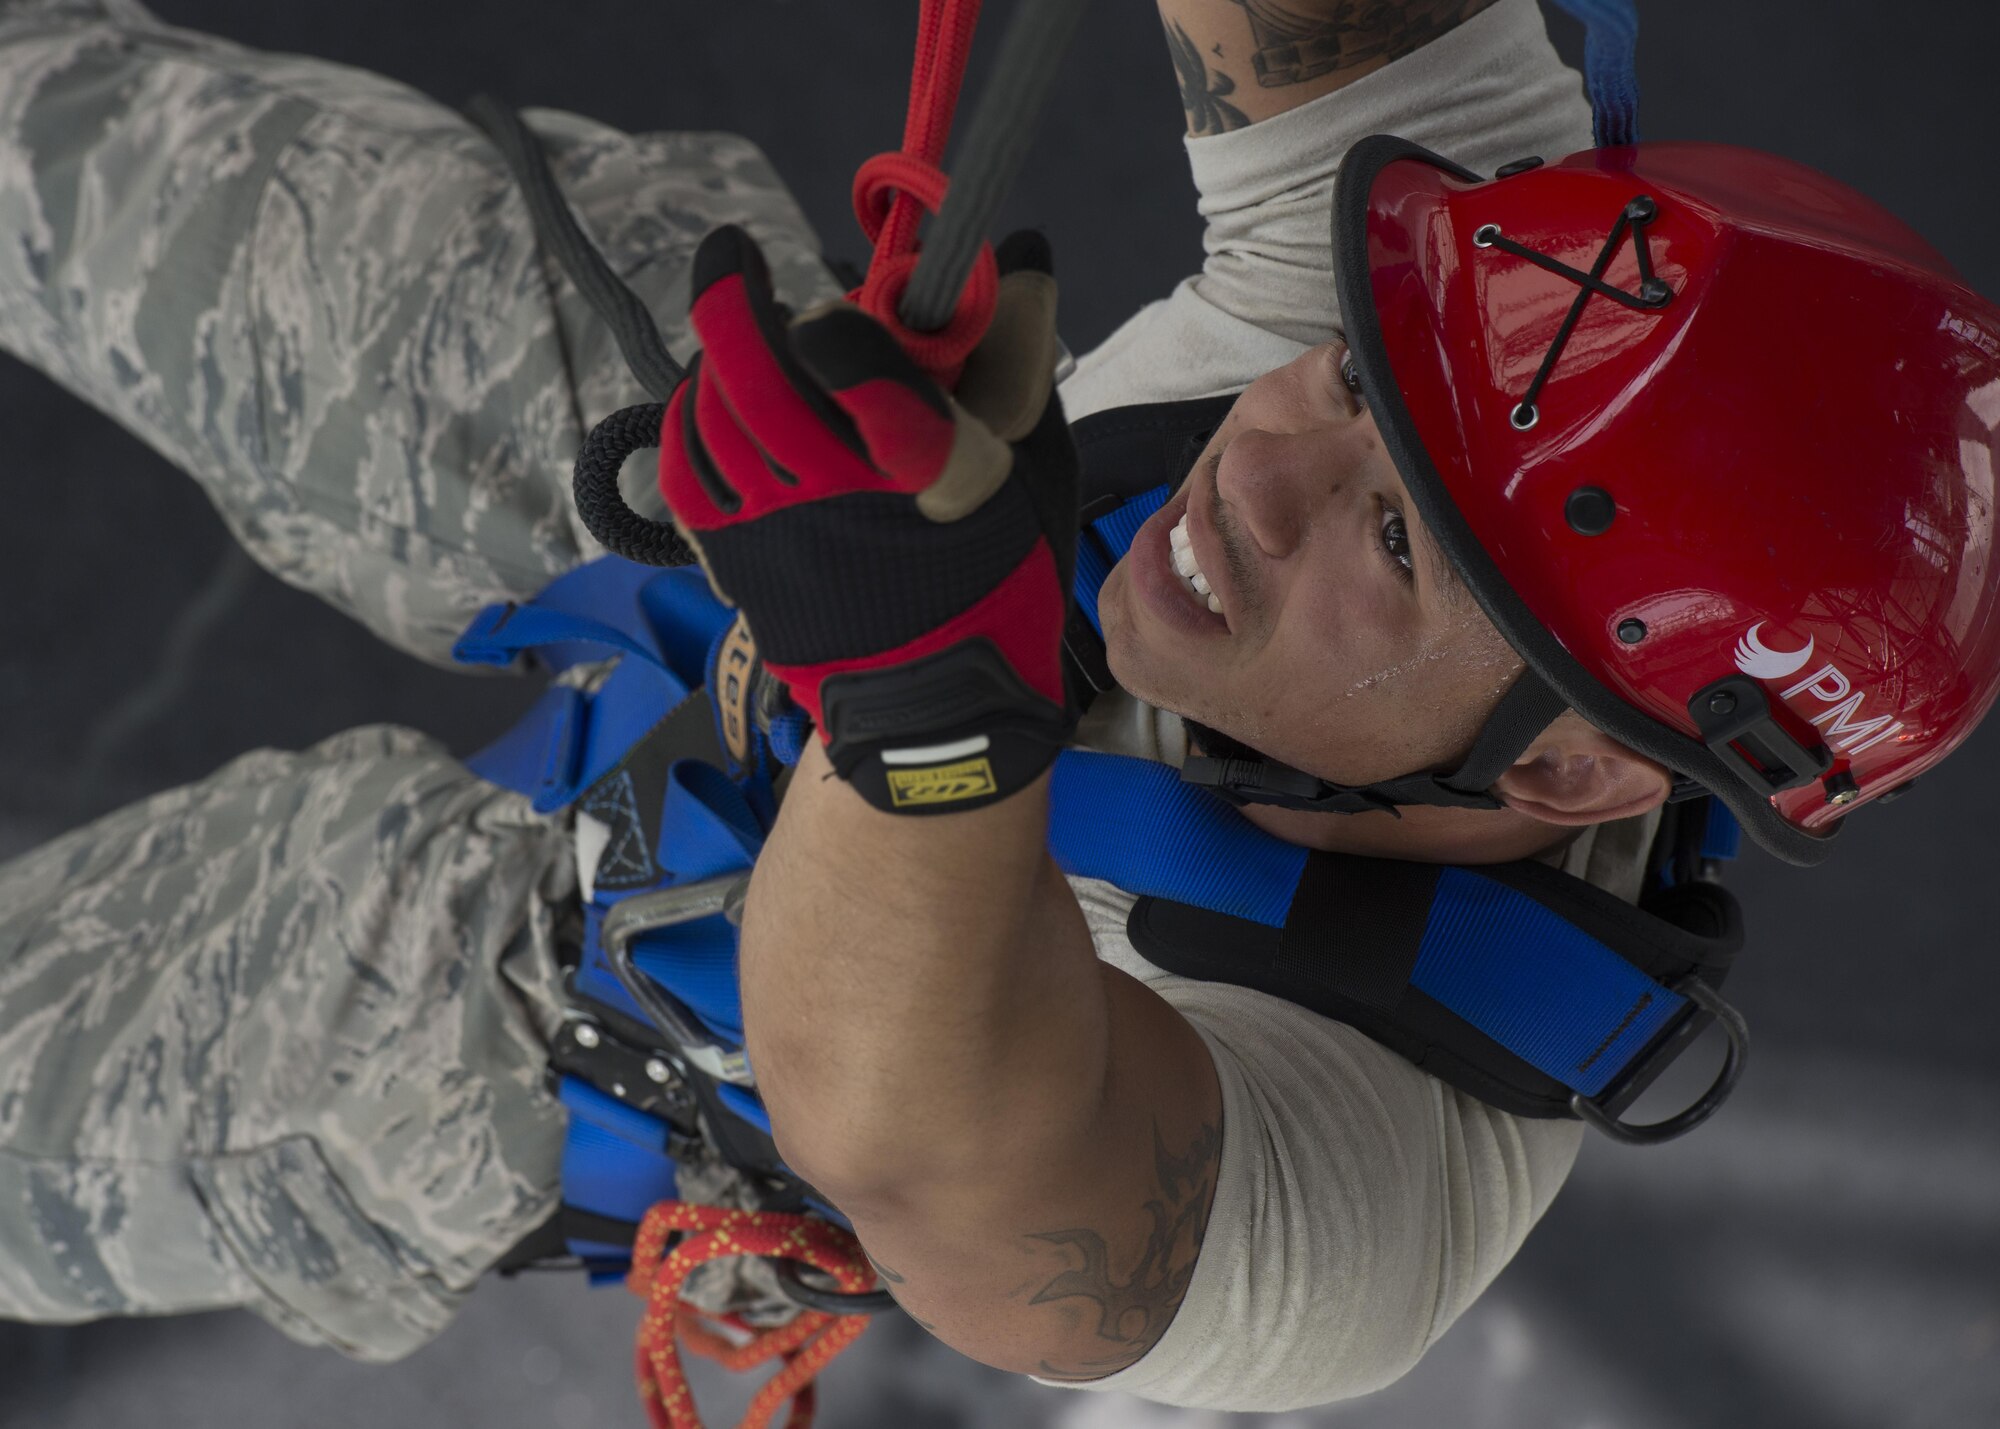 Staff Sgt. Julio Madera, 436th Civil Engineer Squadron fire inspector/crew chief, pulls himself up a rope during a Rescue Technician Course Aug. 18, 2016, at Dover Air Force Base, Del. This 18-day course includes classroom sessions and practical application. (U.S. Air Force photo by Senior Airman Zachary Cacicia)